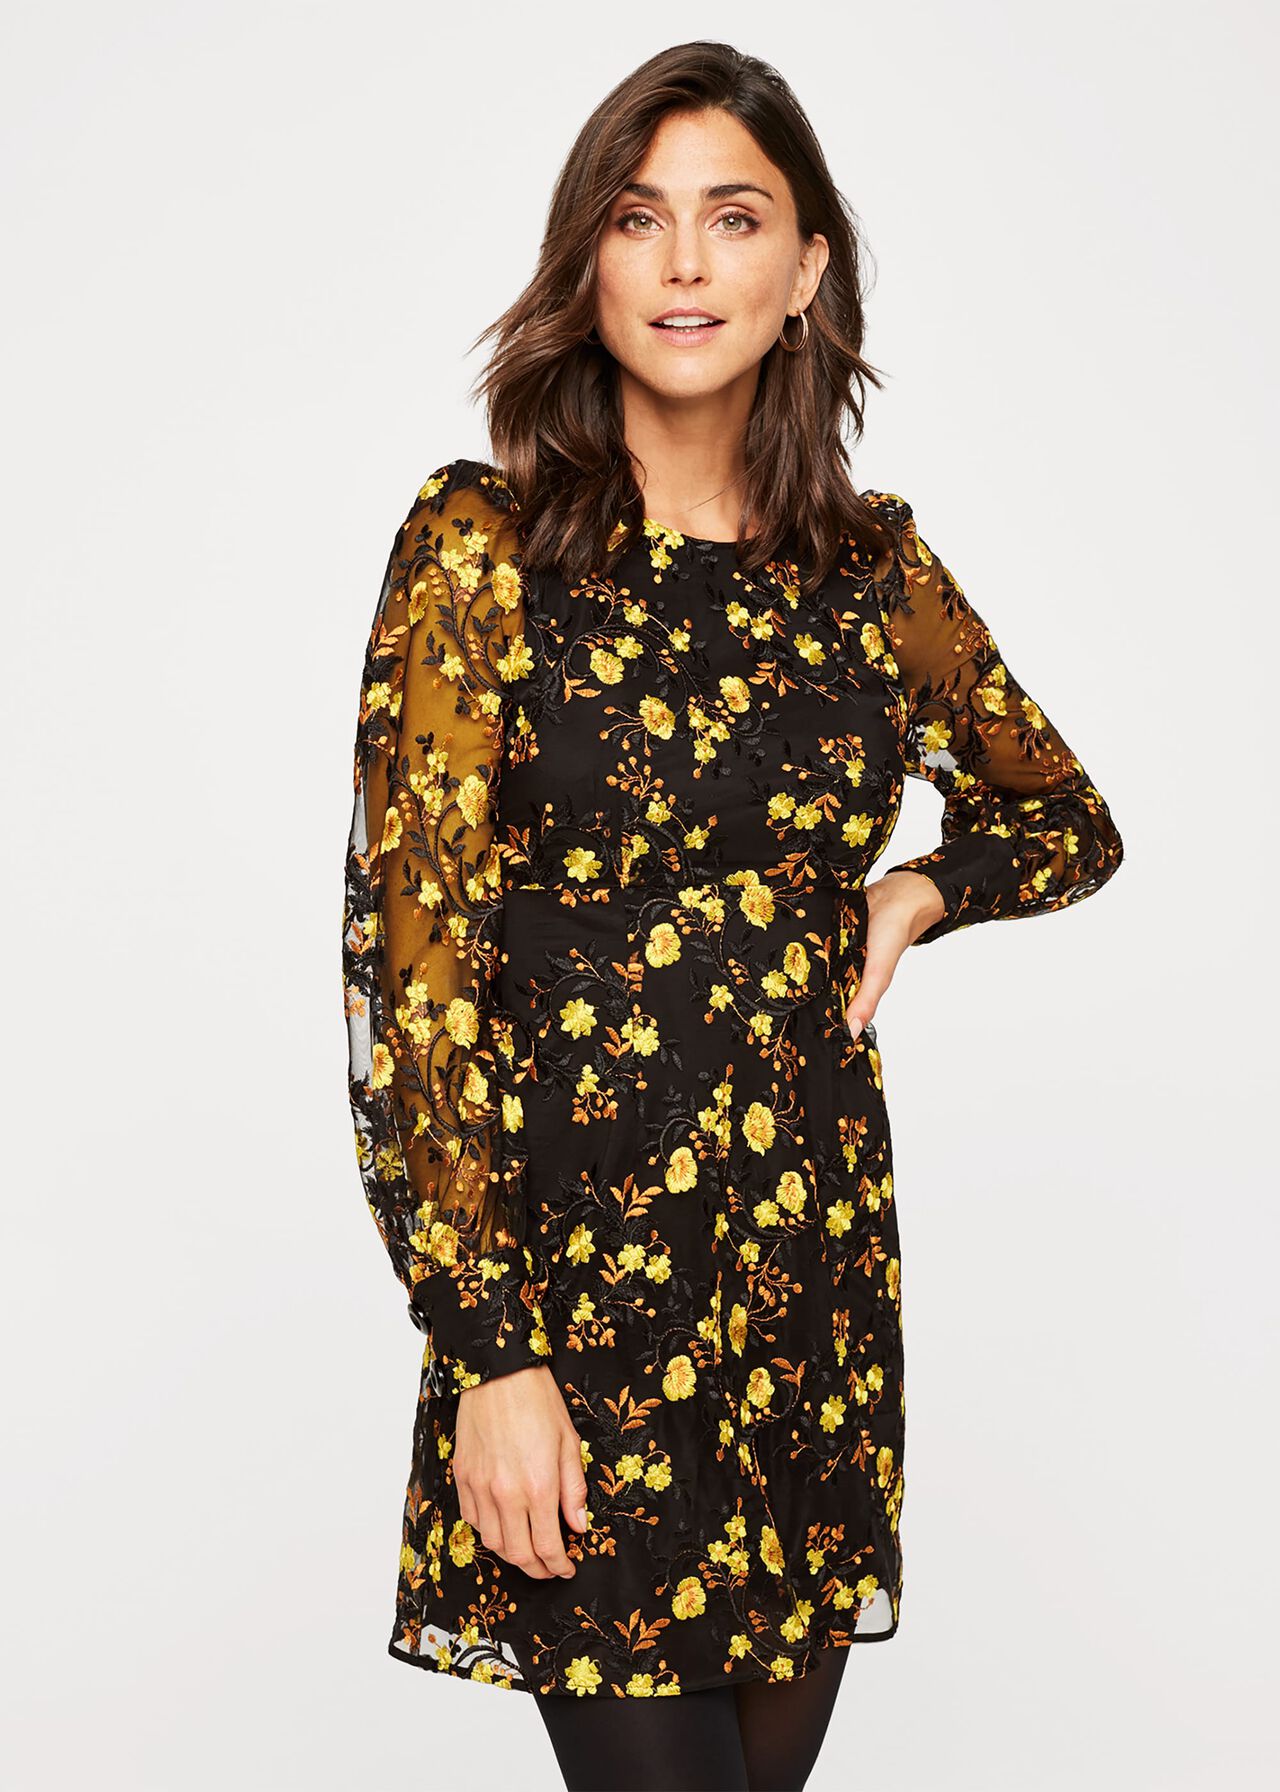 Lovell Floral Embroidered Dress